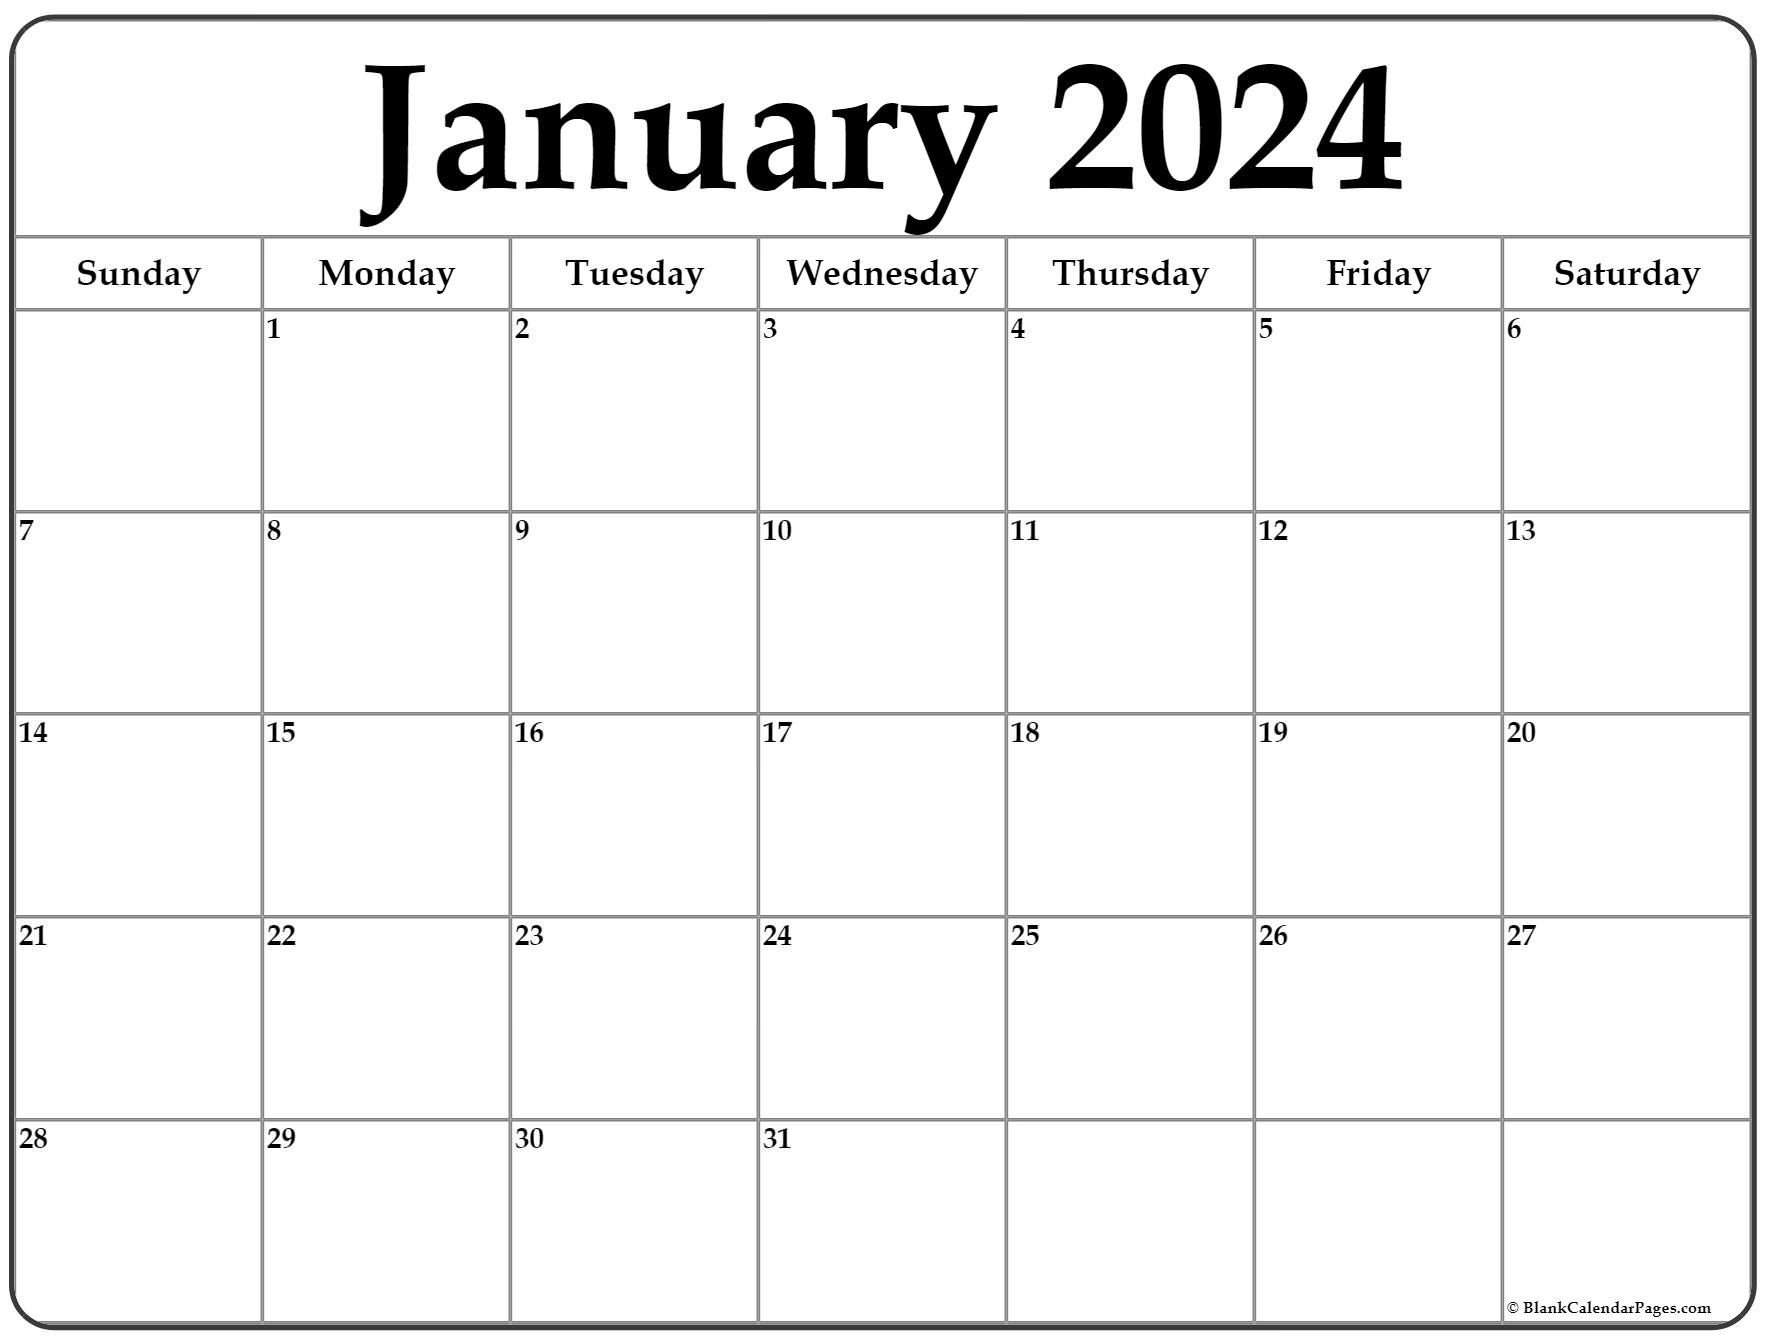 Free Printable 2022 Monthly Calendar With Holidays January 2022 Calendar | Free Printable Calendar Templates